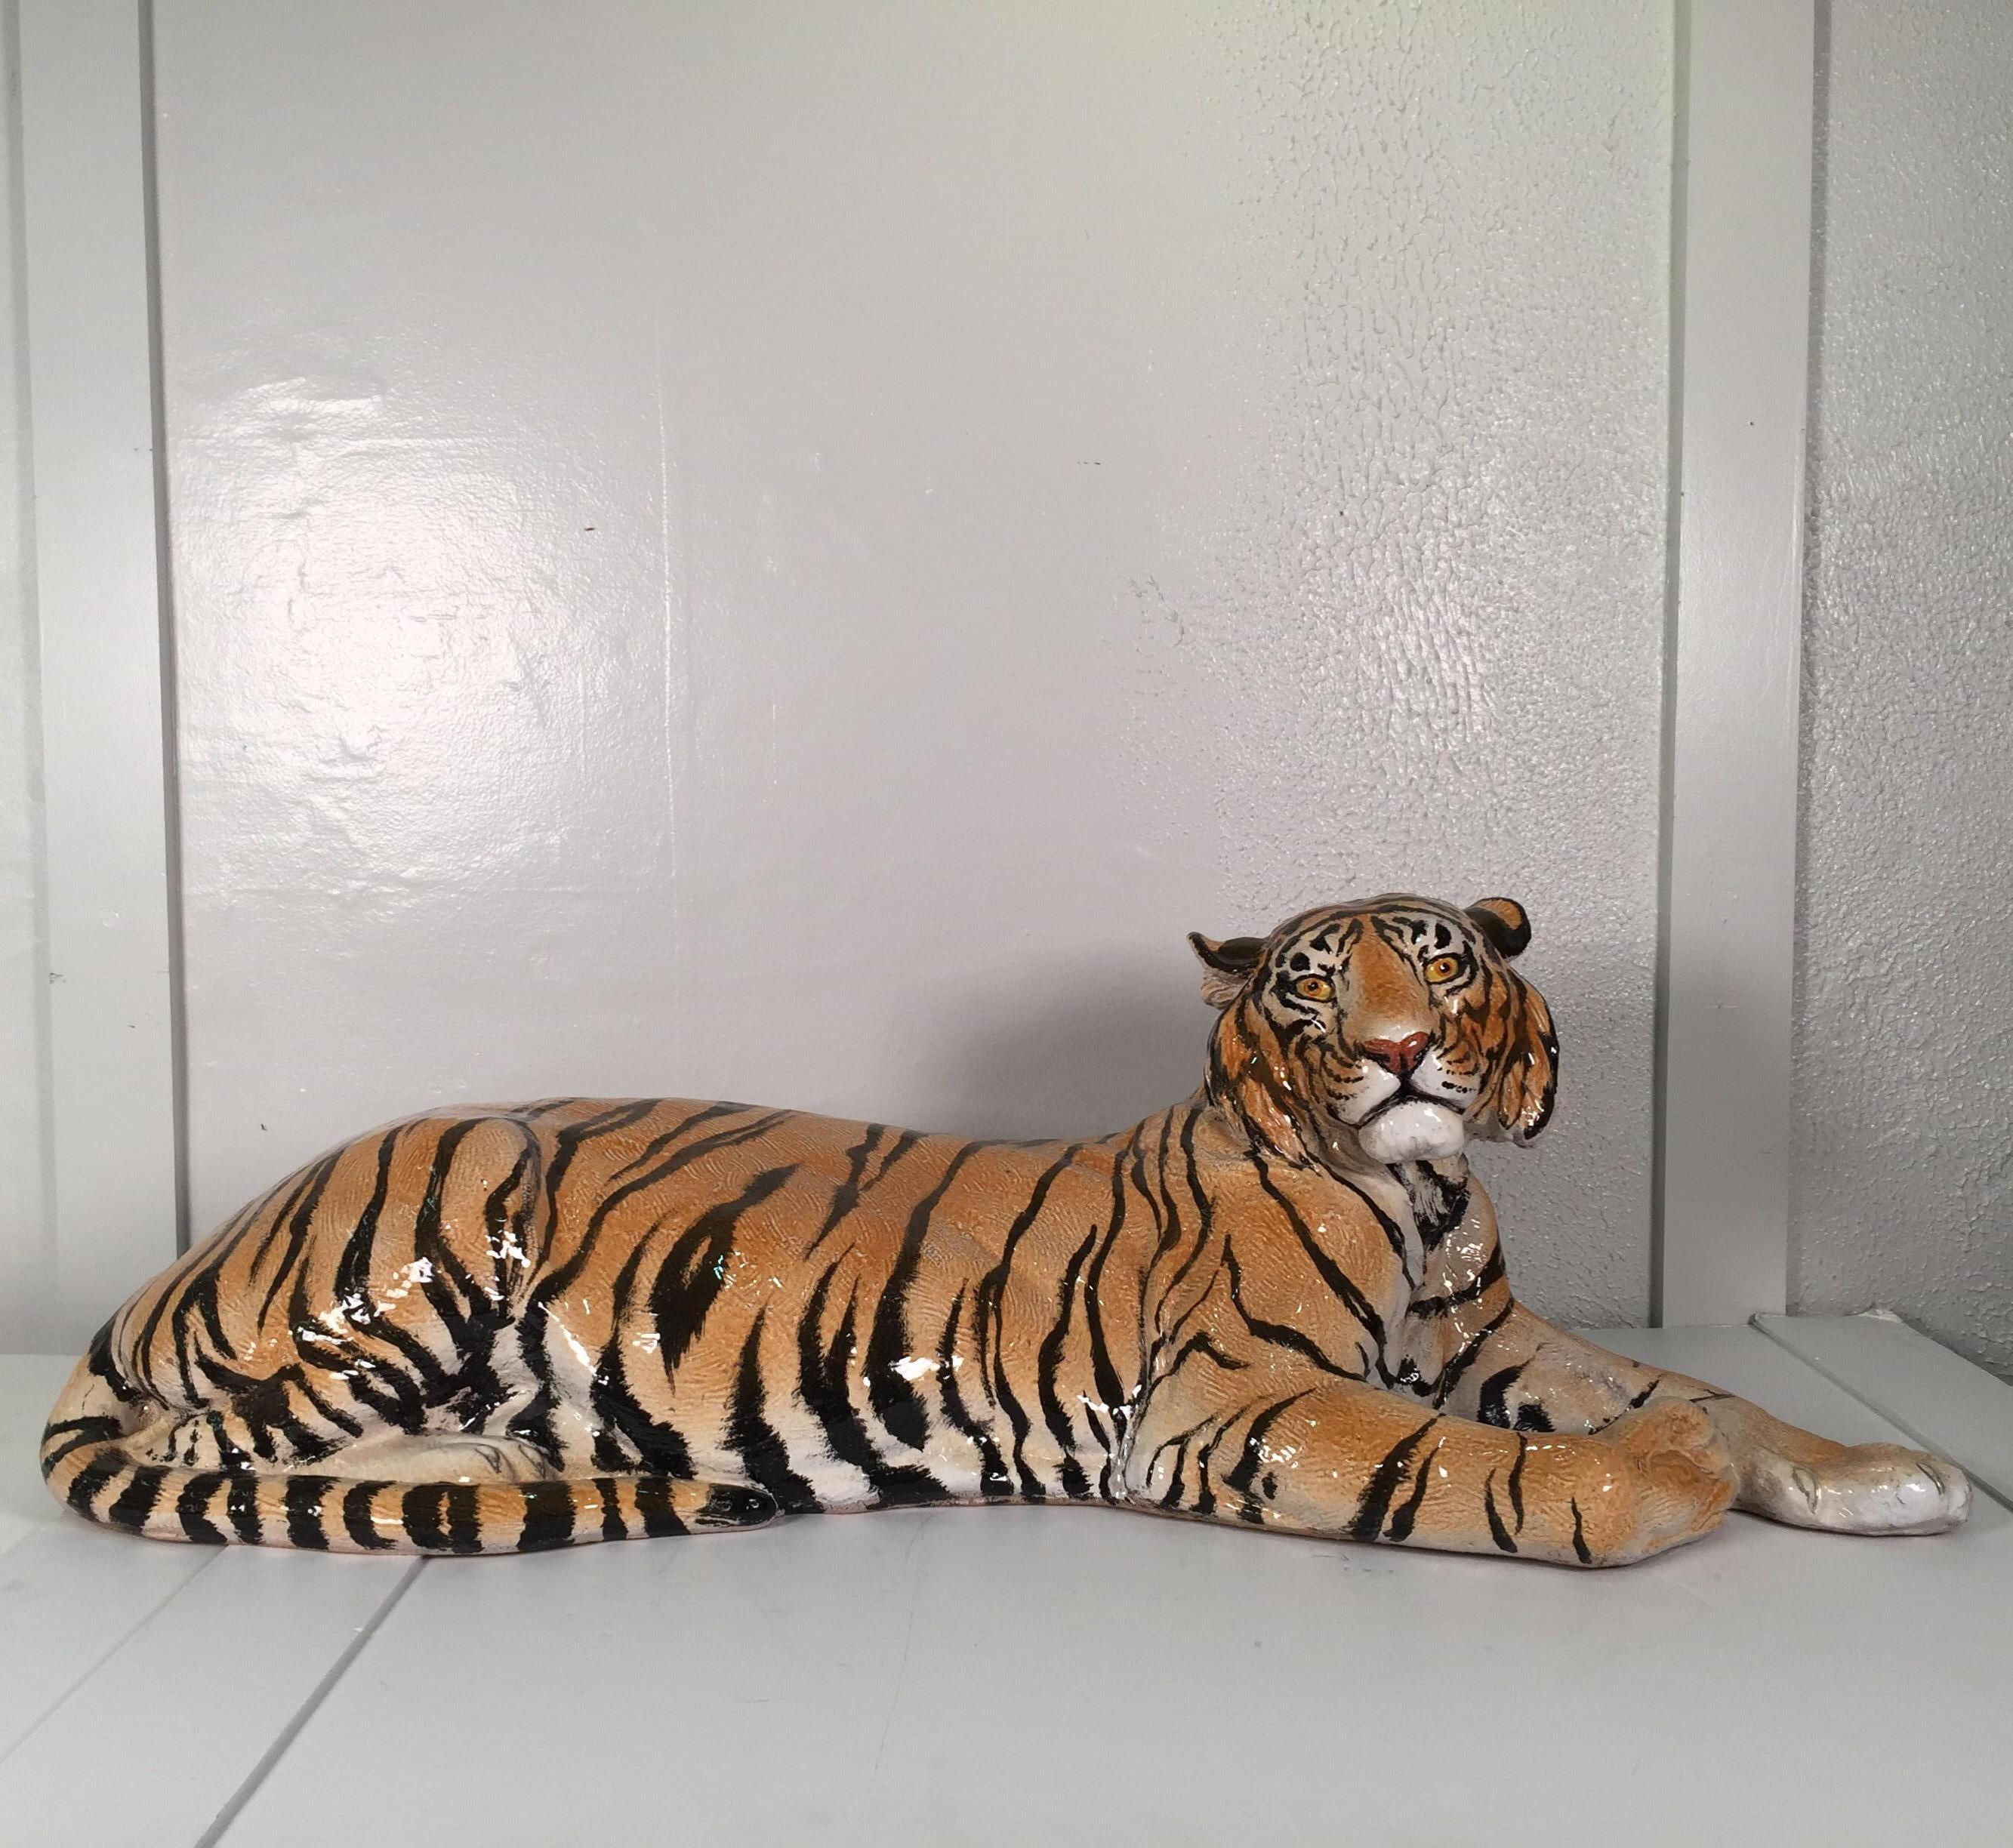 Midcentury hand painted terracotta tiger, signed on base Italy, great for tiger lovers
Dimensions: 42